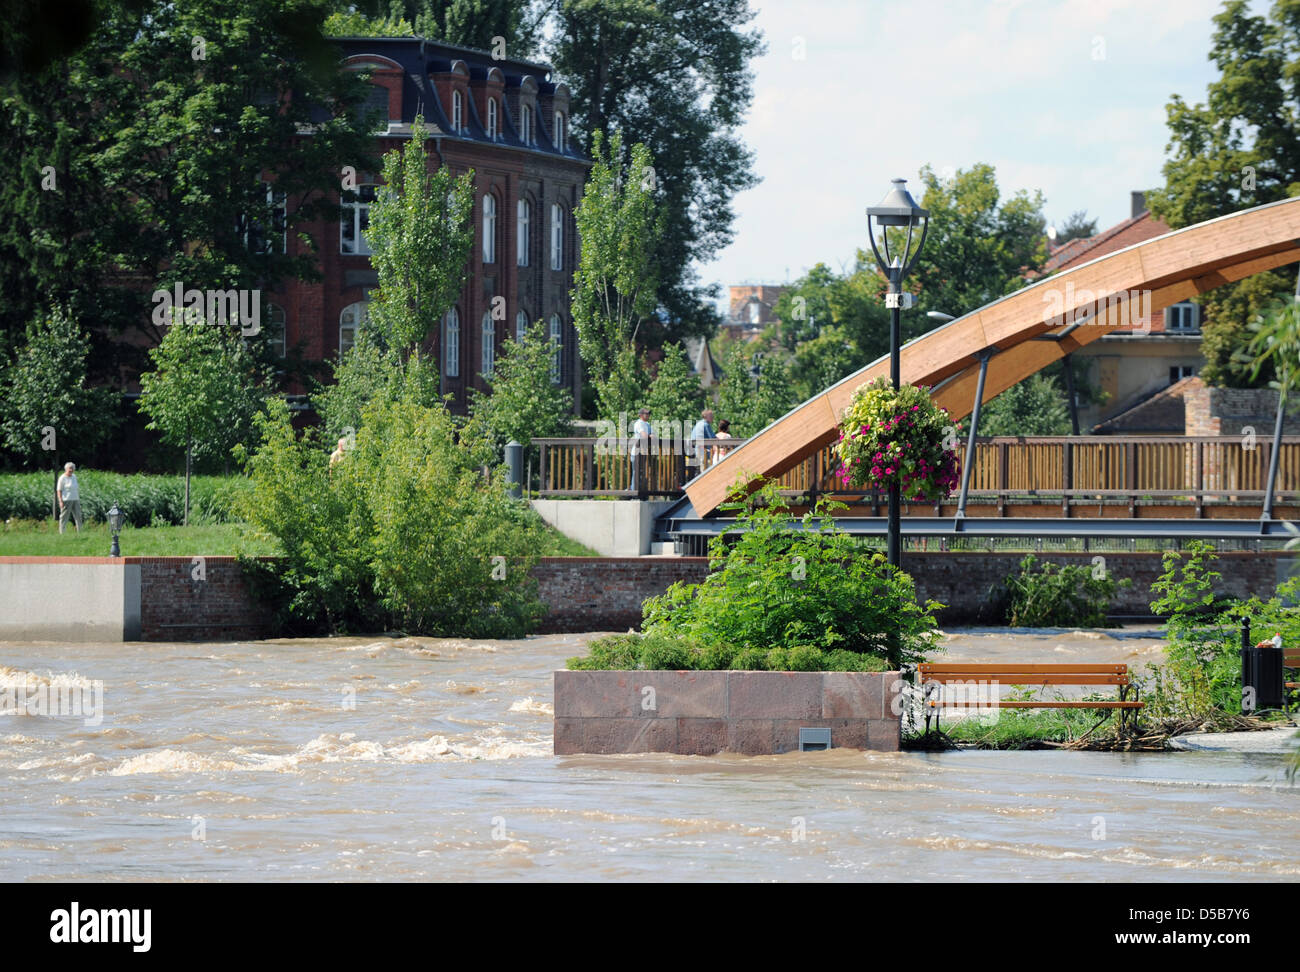 The river Nysa, incresed in height, due to high waters, flows underneath a bridge in the Polish town Gubin, Poland, 10 August 2010. The gauge height of the river in Guben reached 6,27m and remained static since. Photo: Soeren Stache Stock Photo